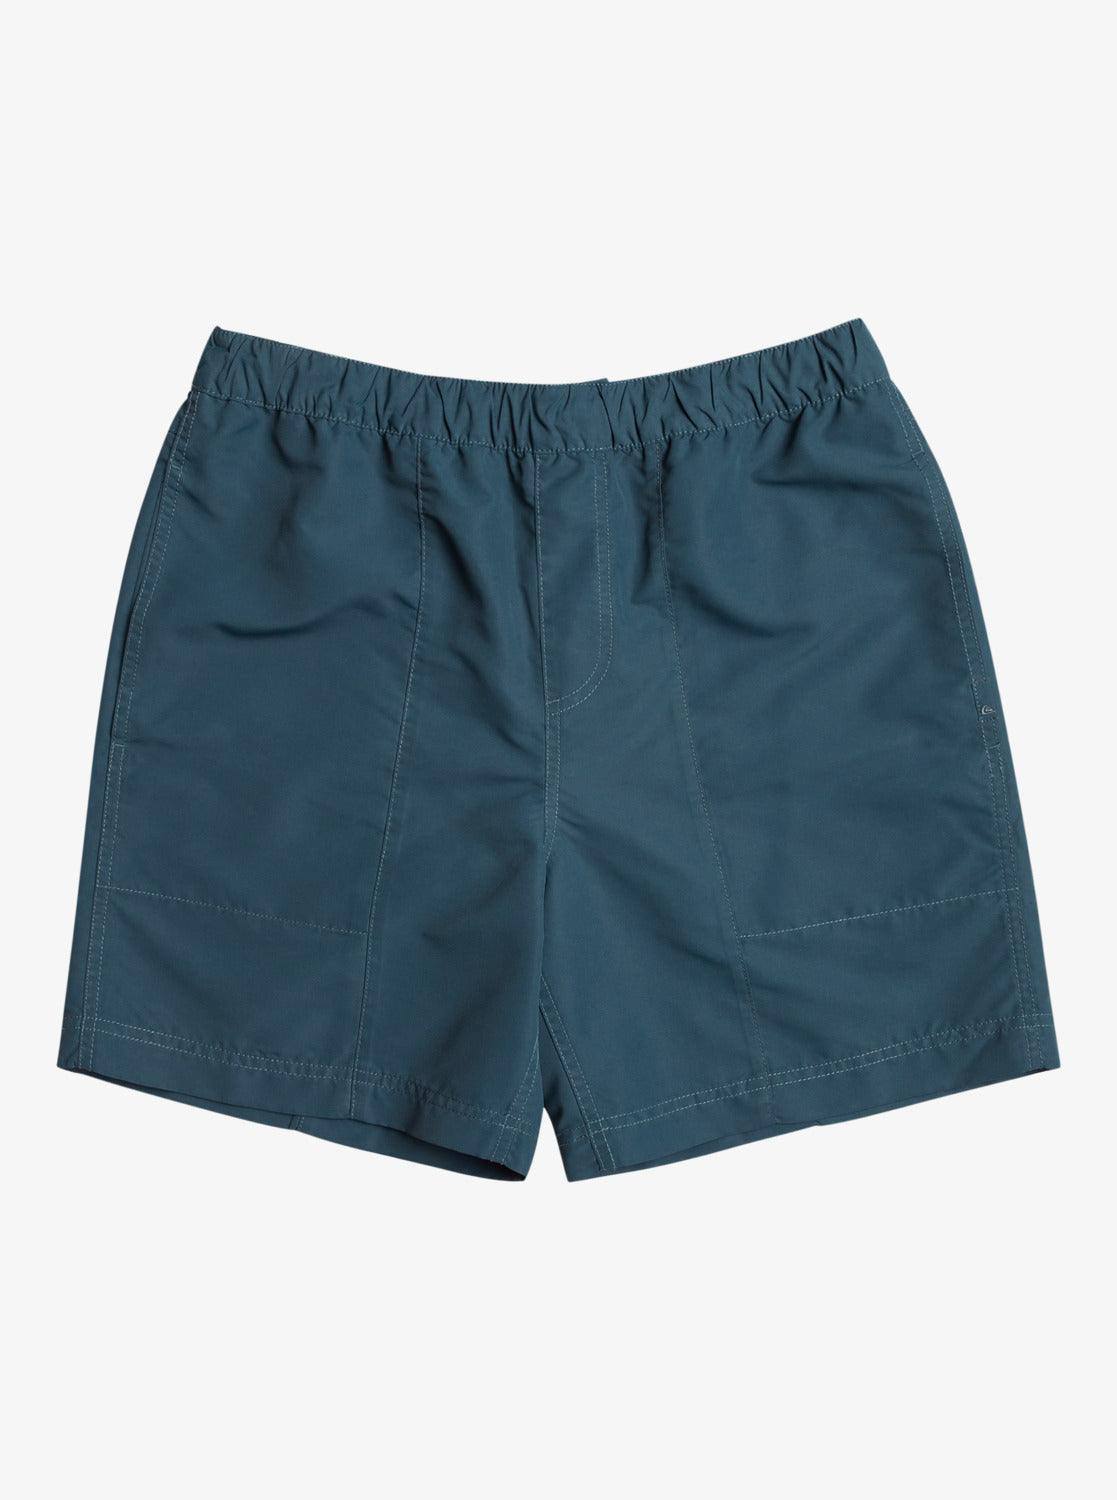 Made Better 17" Amphibian Board Short - The Shoe CollectiveQuiksilver